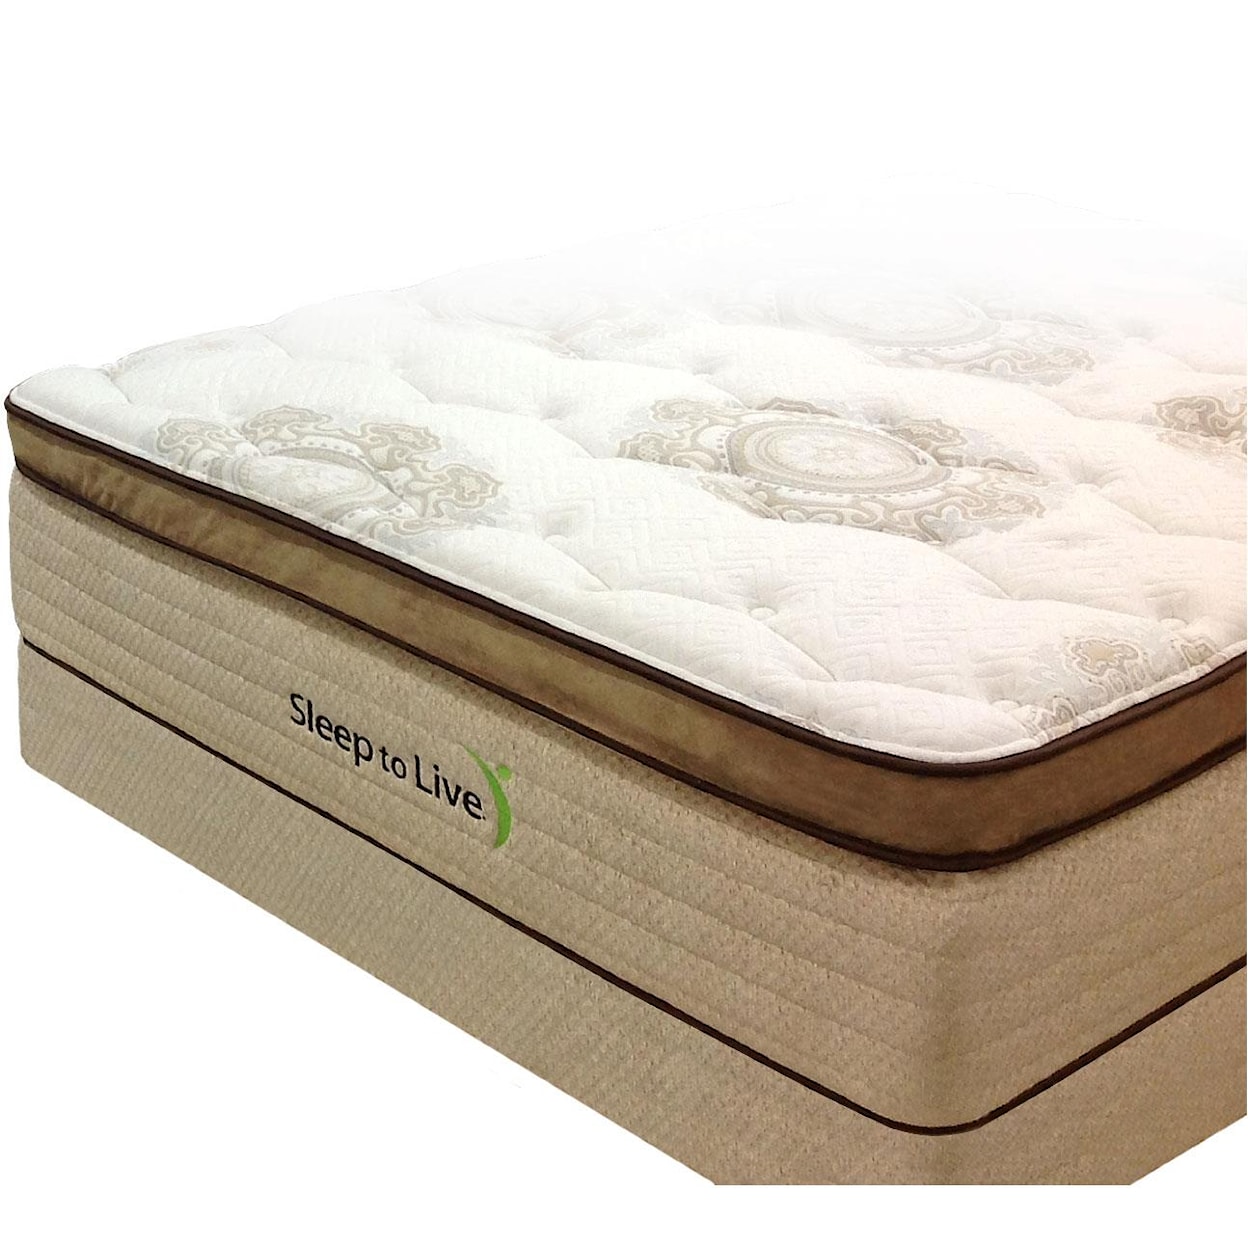 Kingsdown Body System 1 King Pocketed Coil Mattress